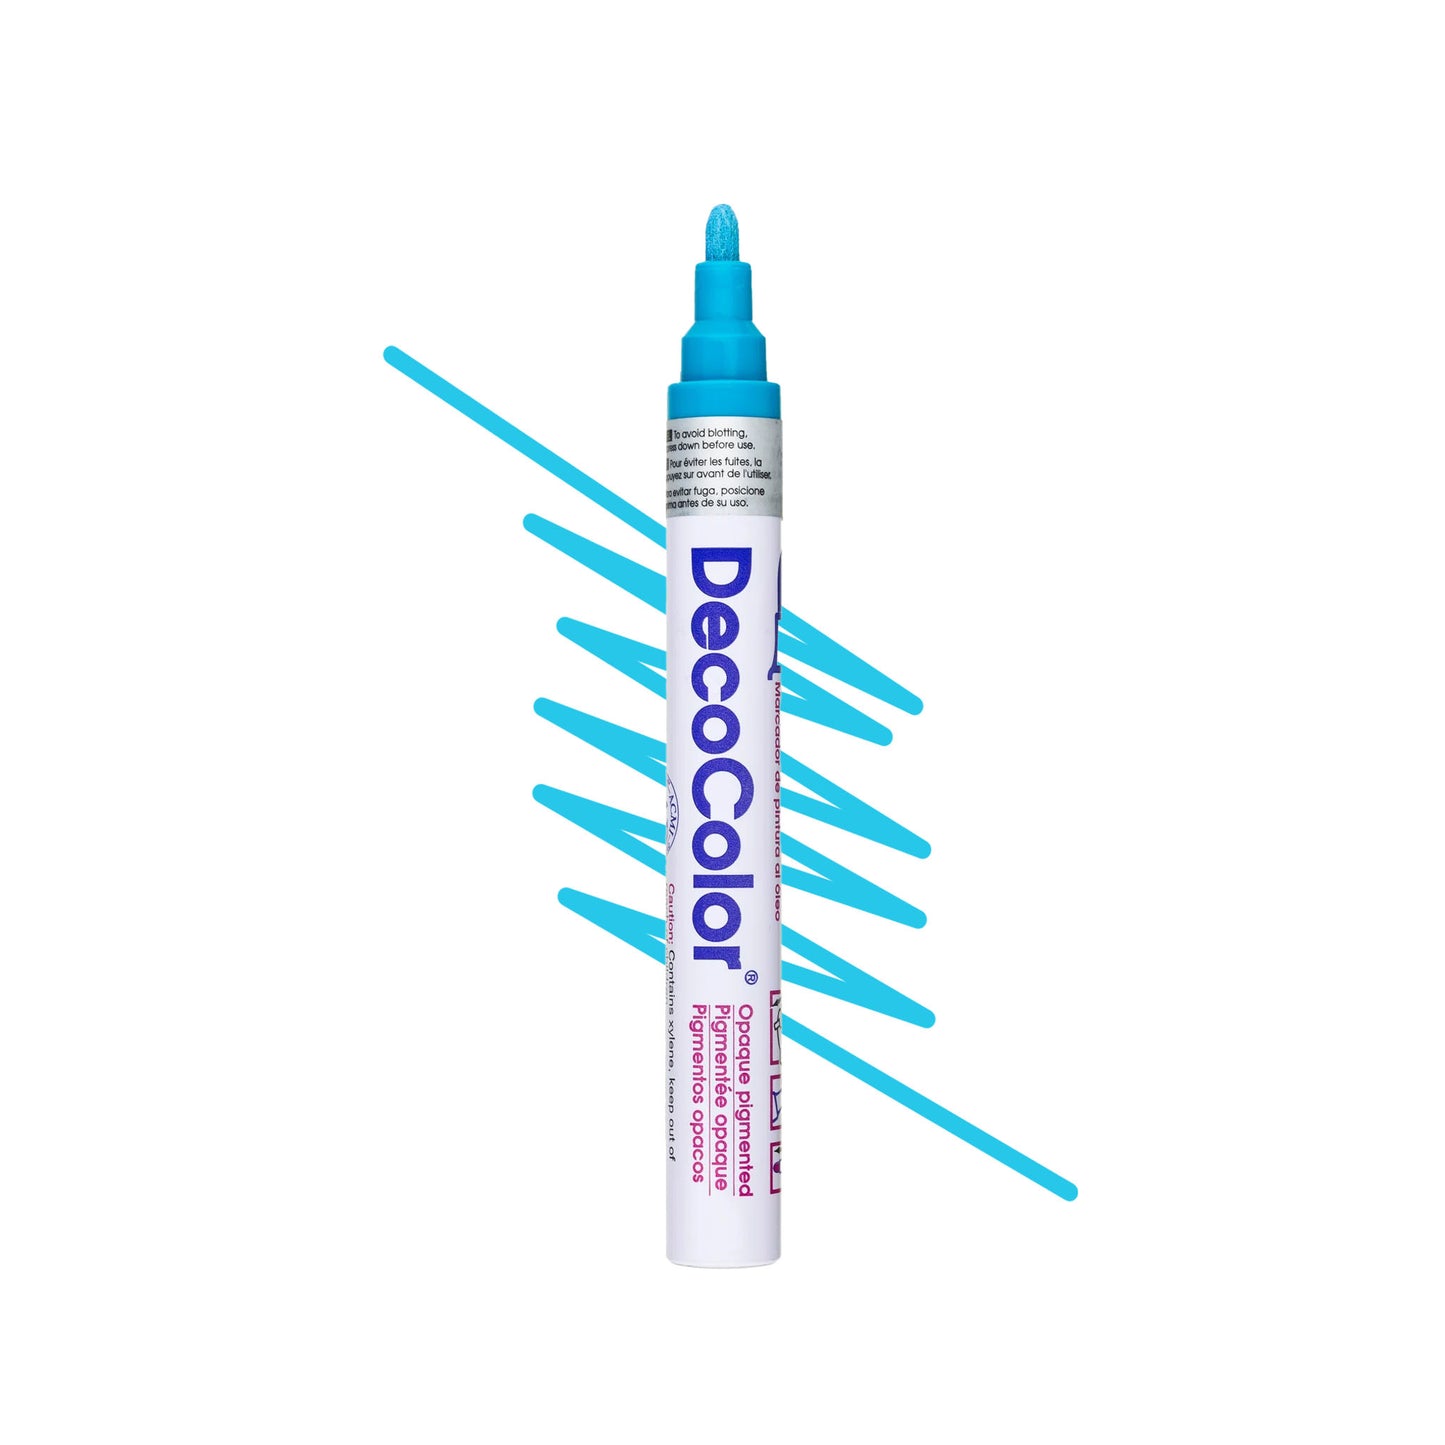 Deco Color artist paint markers in light blue.